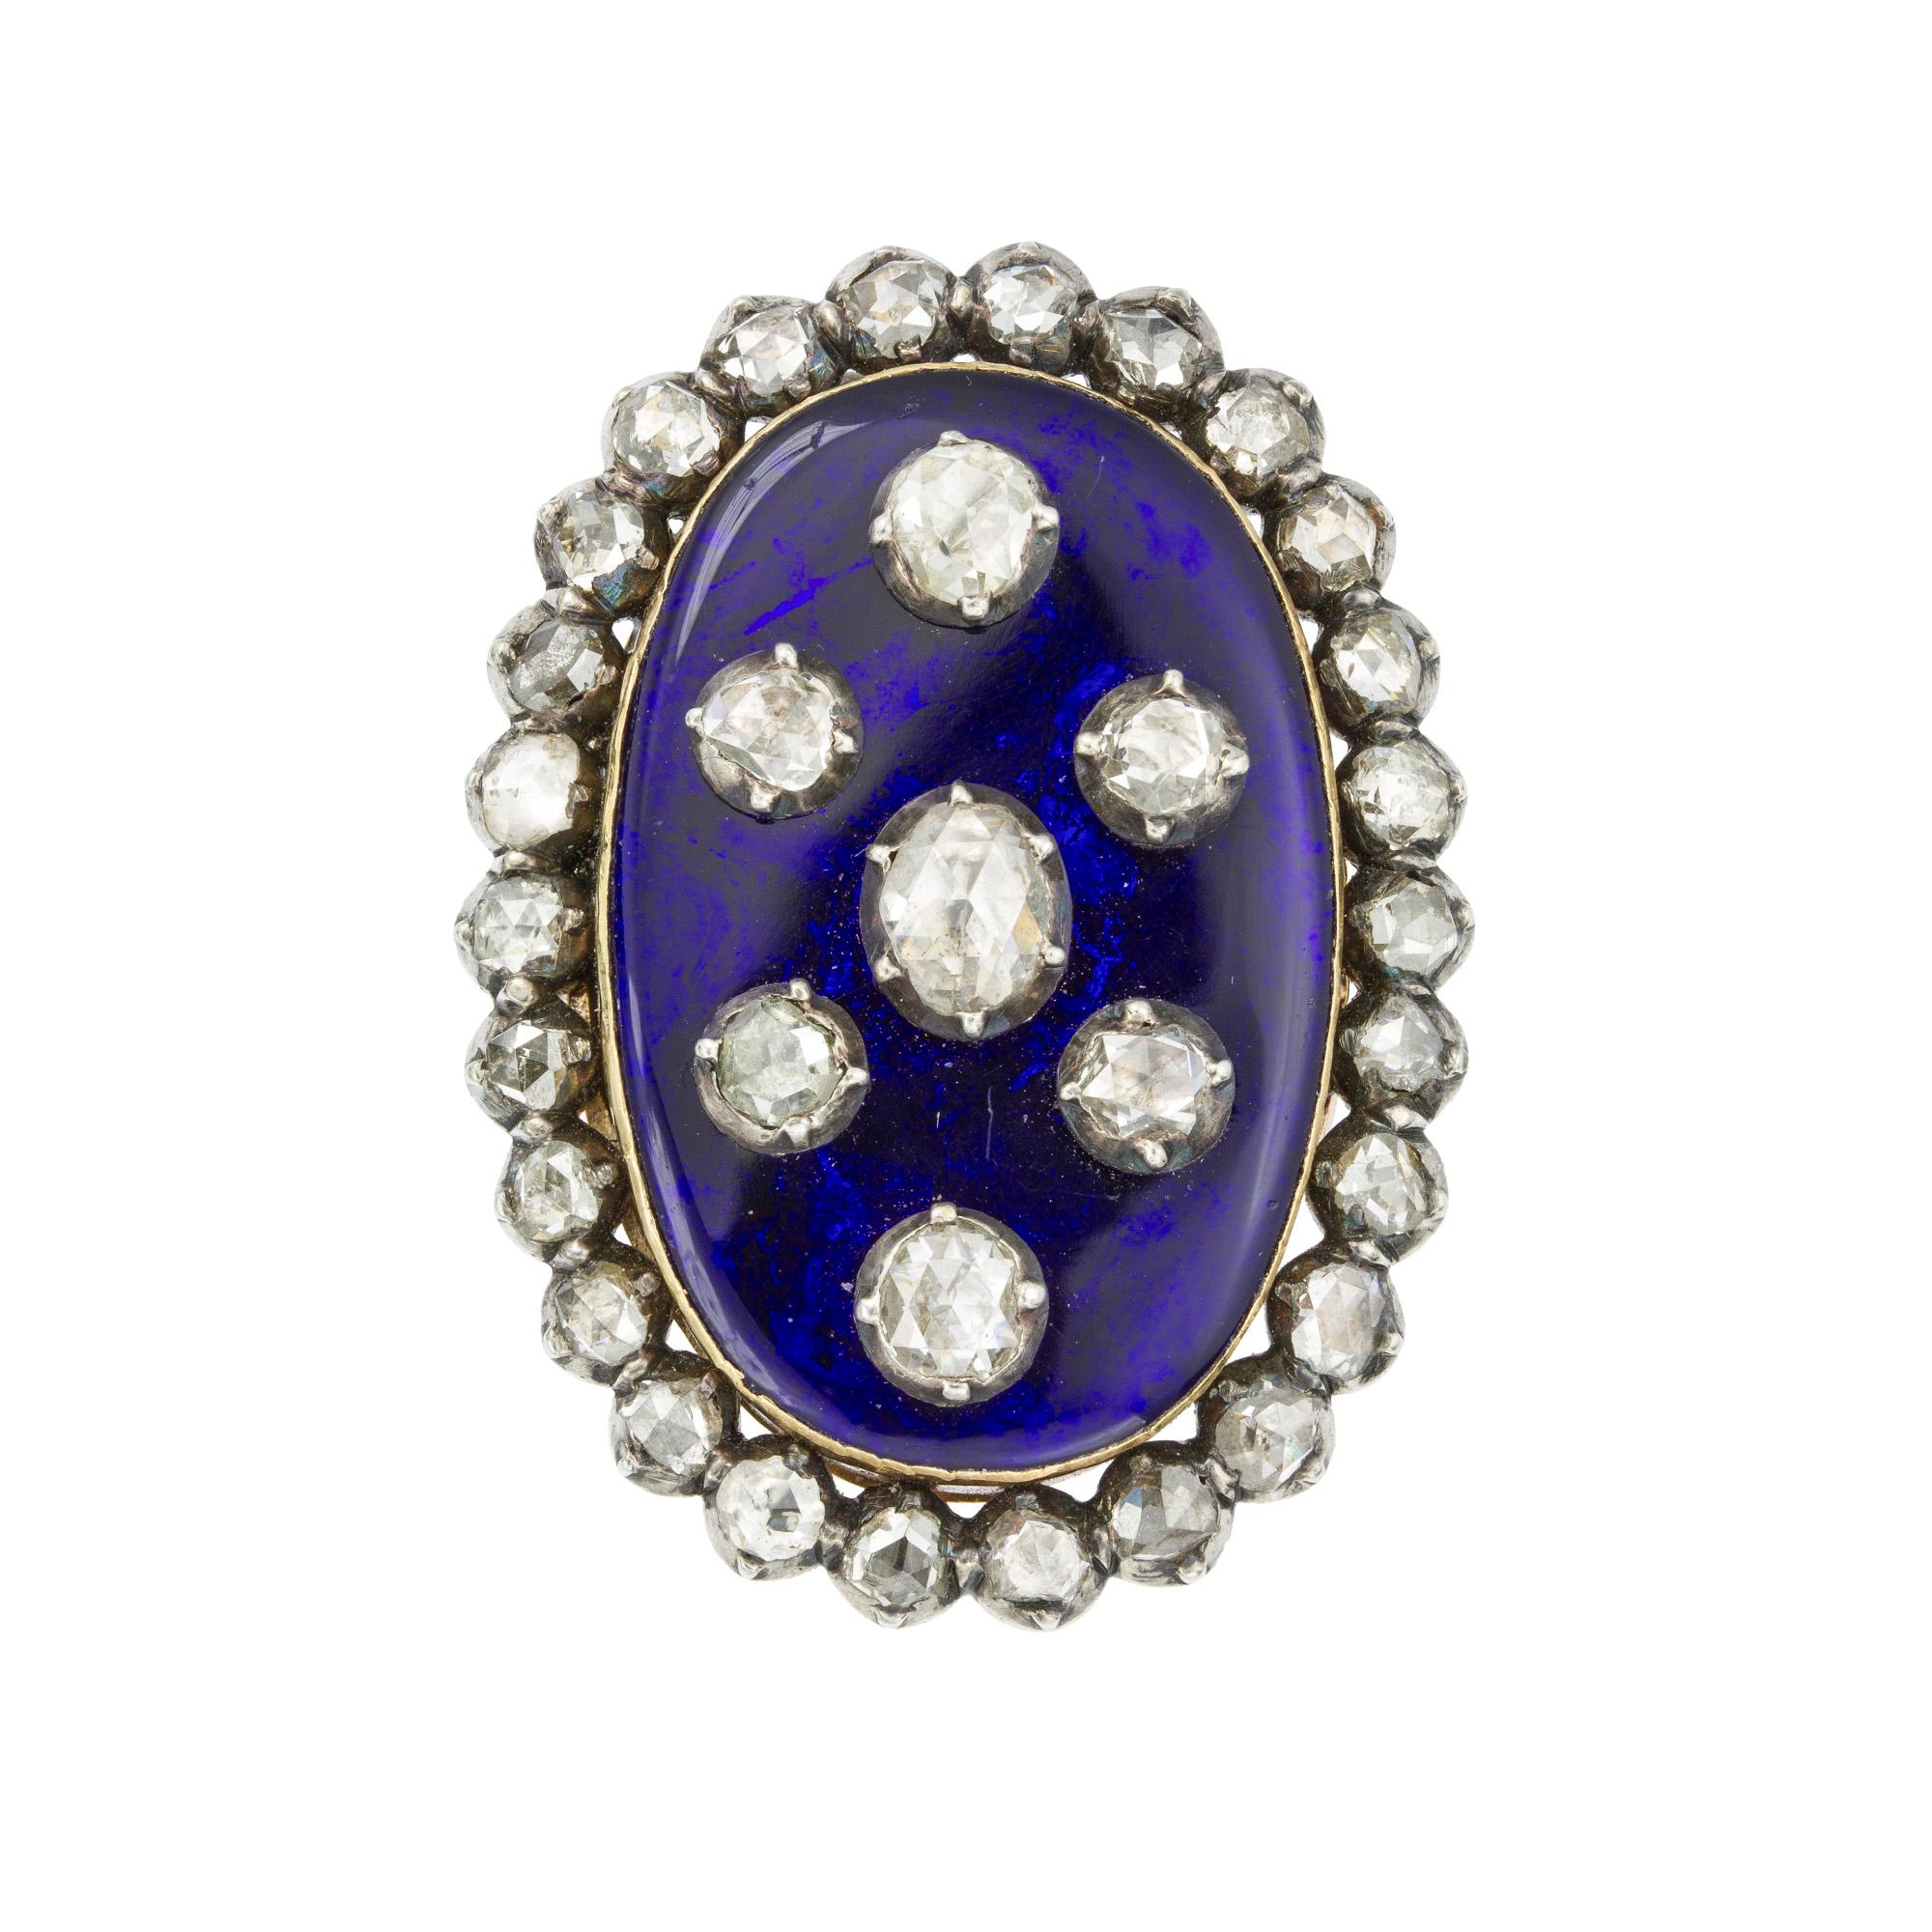 A Georgian blue enamel and diamond ring, the oval blue enamel set to the centre with an oval rose-cut diamond, surrounded by six round rose-cut diamonds  all diamonds cut-down silver collet-set on enamel, to a rose-cut diamond-set boarder, diamonds